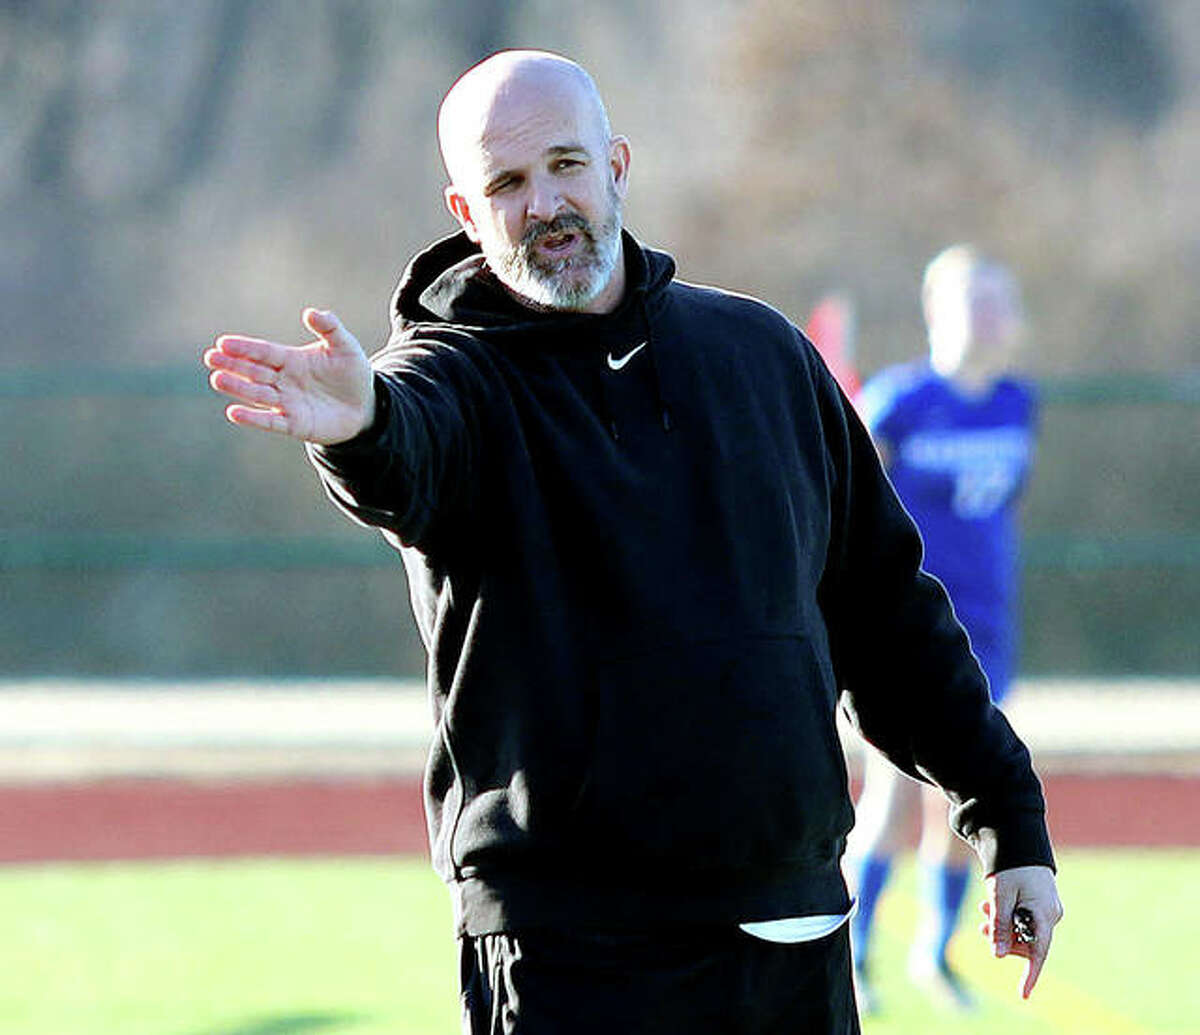 Marquette Catholic girls soccer coach Brian Hoener’s team dropped a 3-0 decision to Belleville Althoff in pool play action of the Metro Cup tourney Tuesday night at Althoff. Hoener is shown giving his teams instructions during Monday;s game against Belleville West.